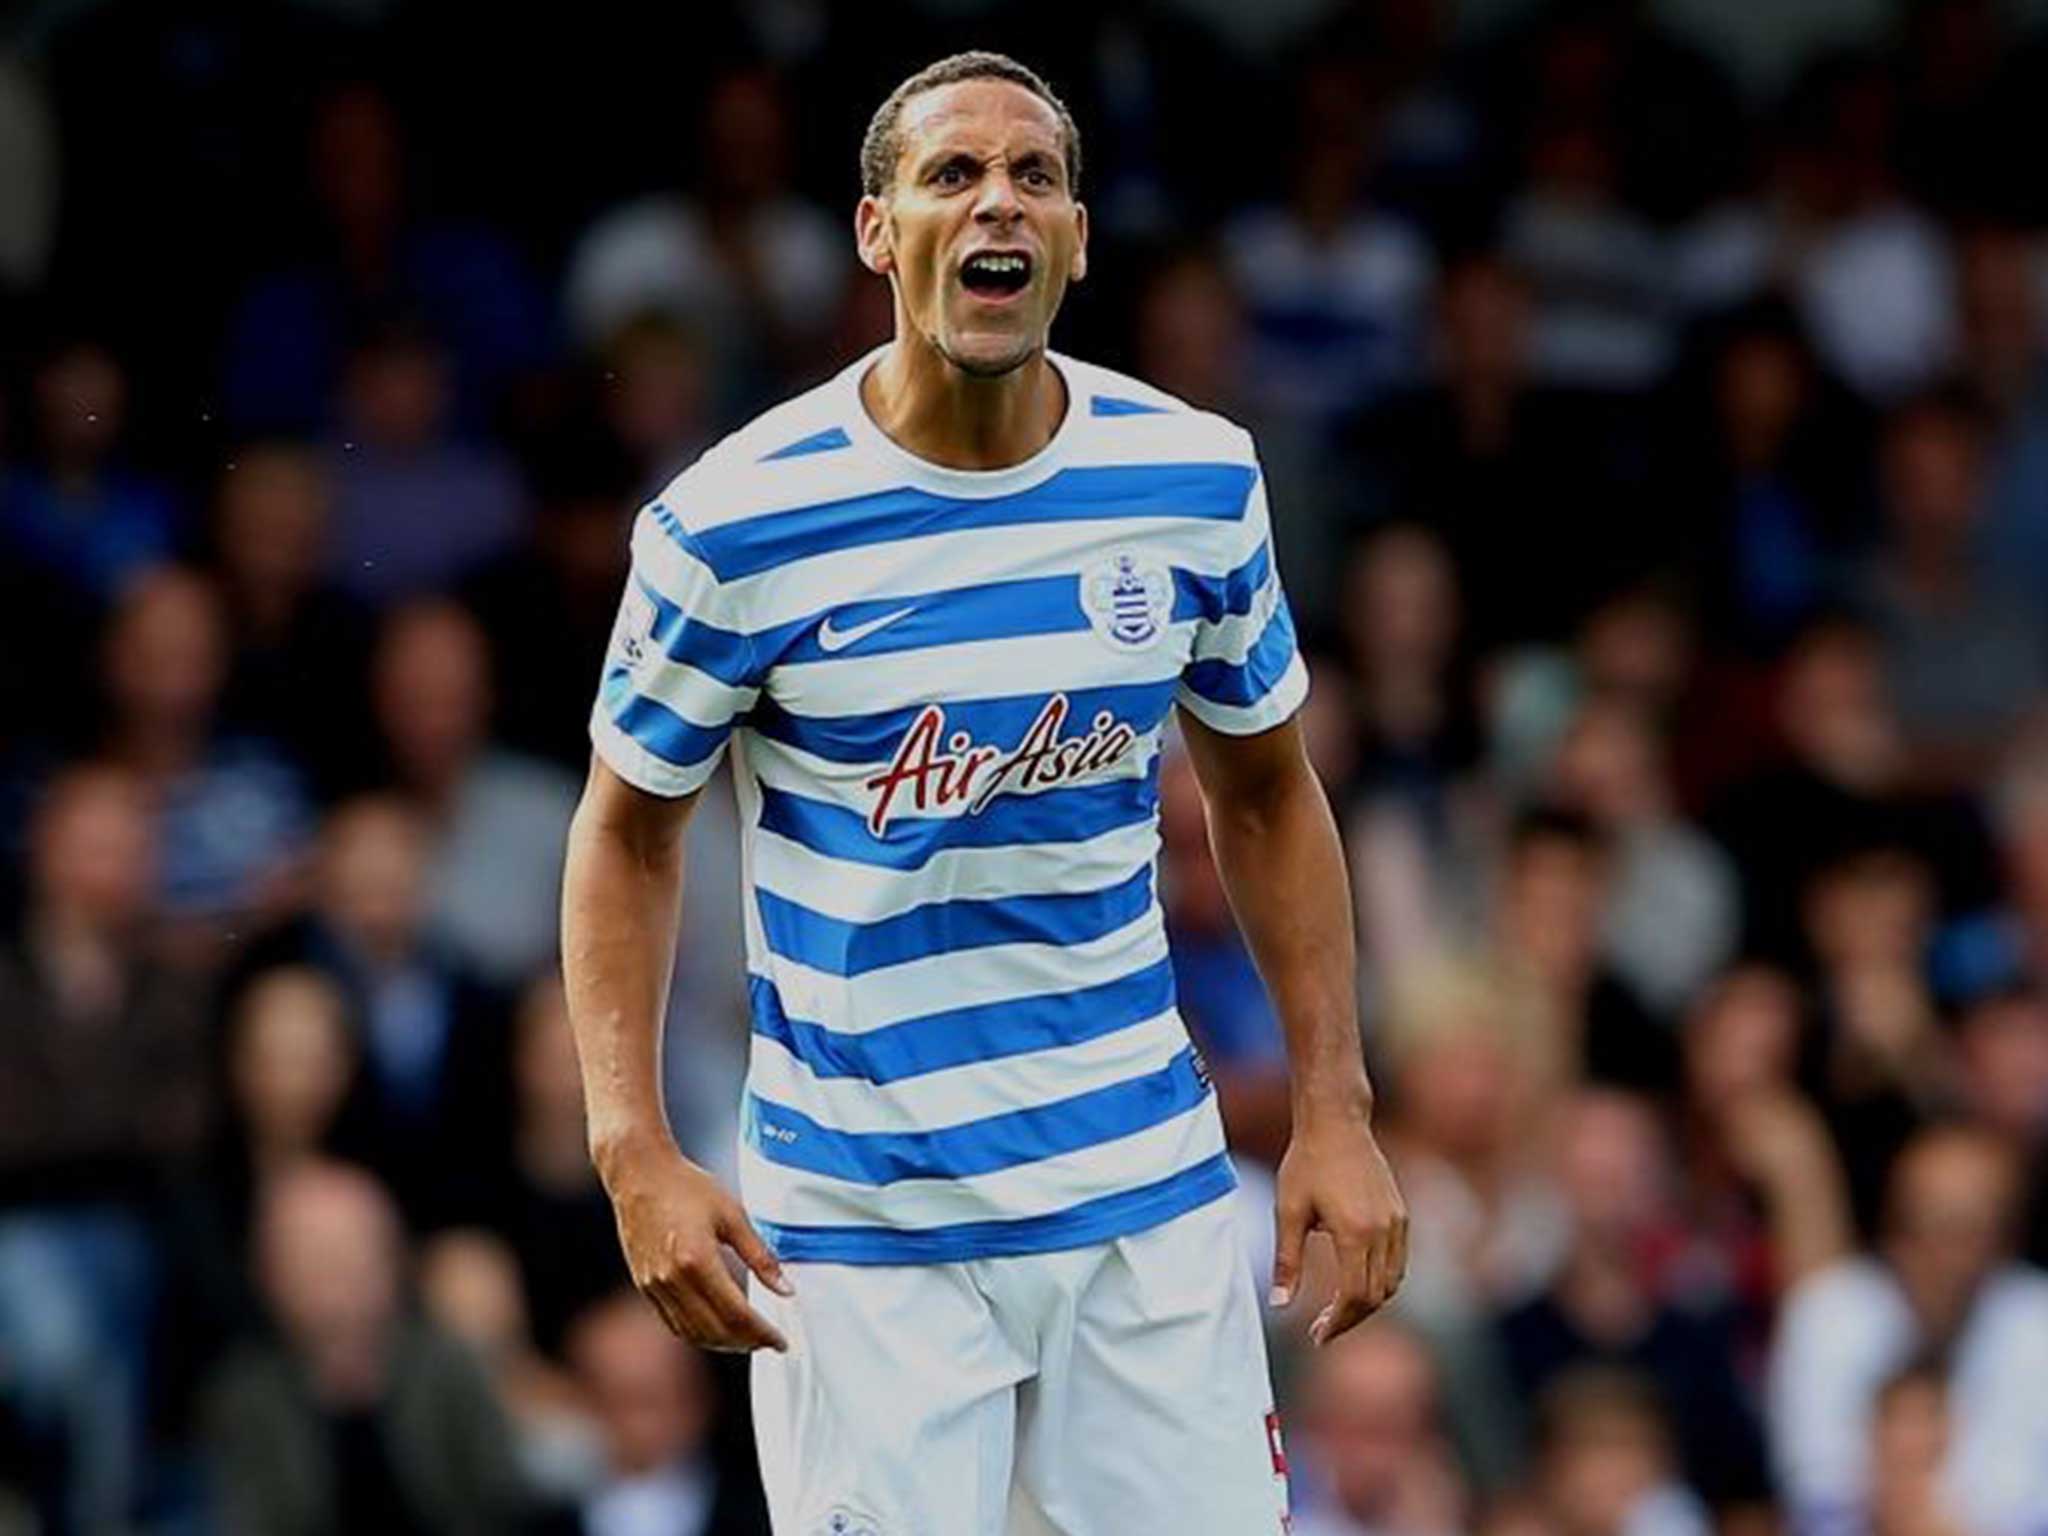 Ferdinand first came to Old Trafford Manchester United ran on smooth, almost predictable lines